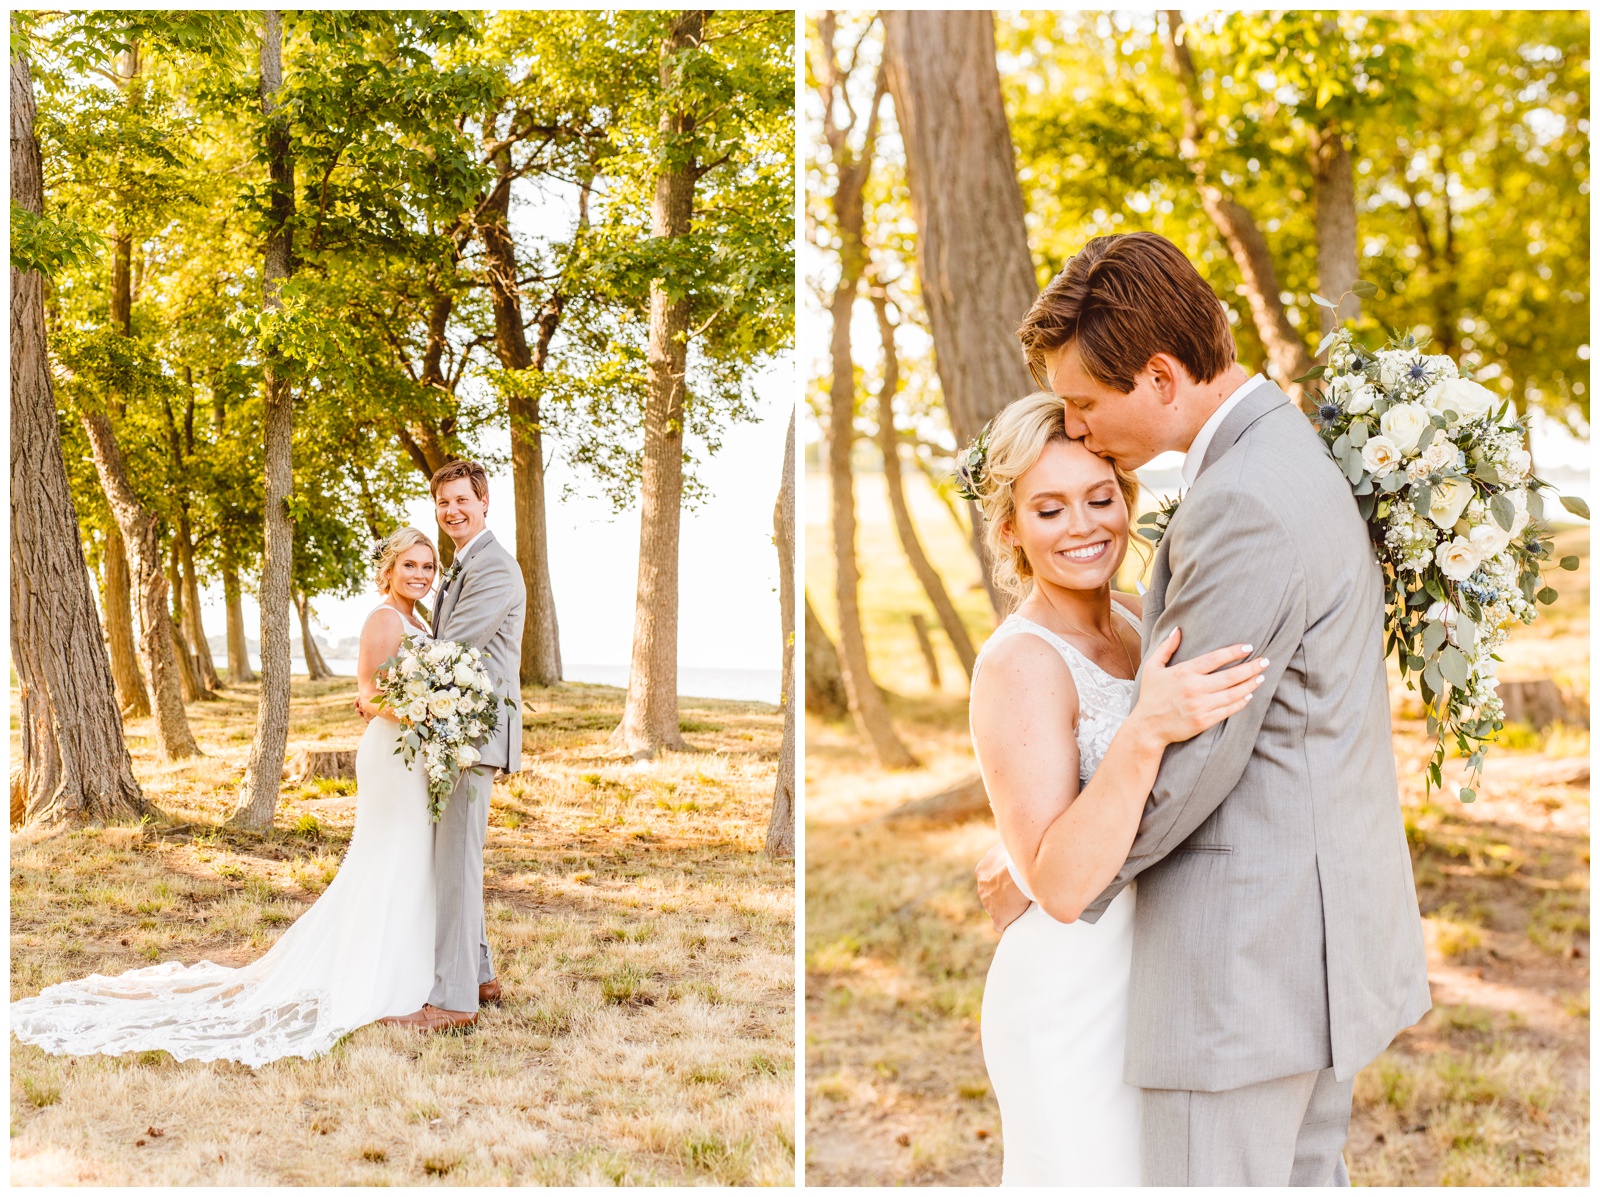 Romantic Blue Waterfront Maryland Wedding - Brooke Michelle Photography